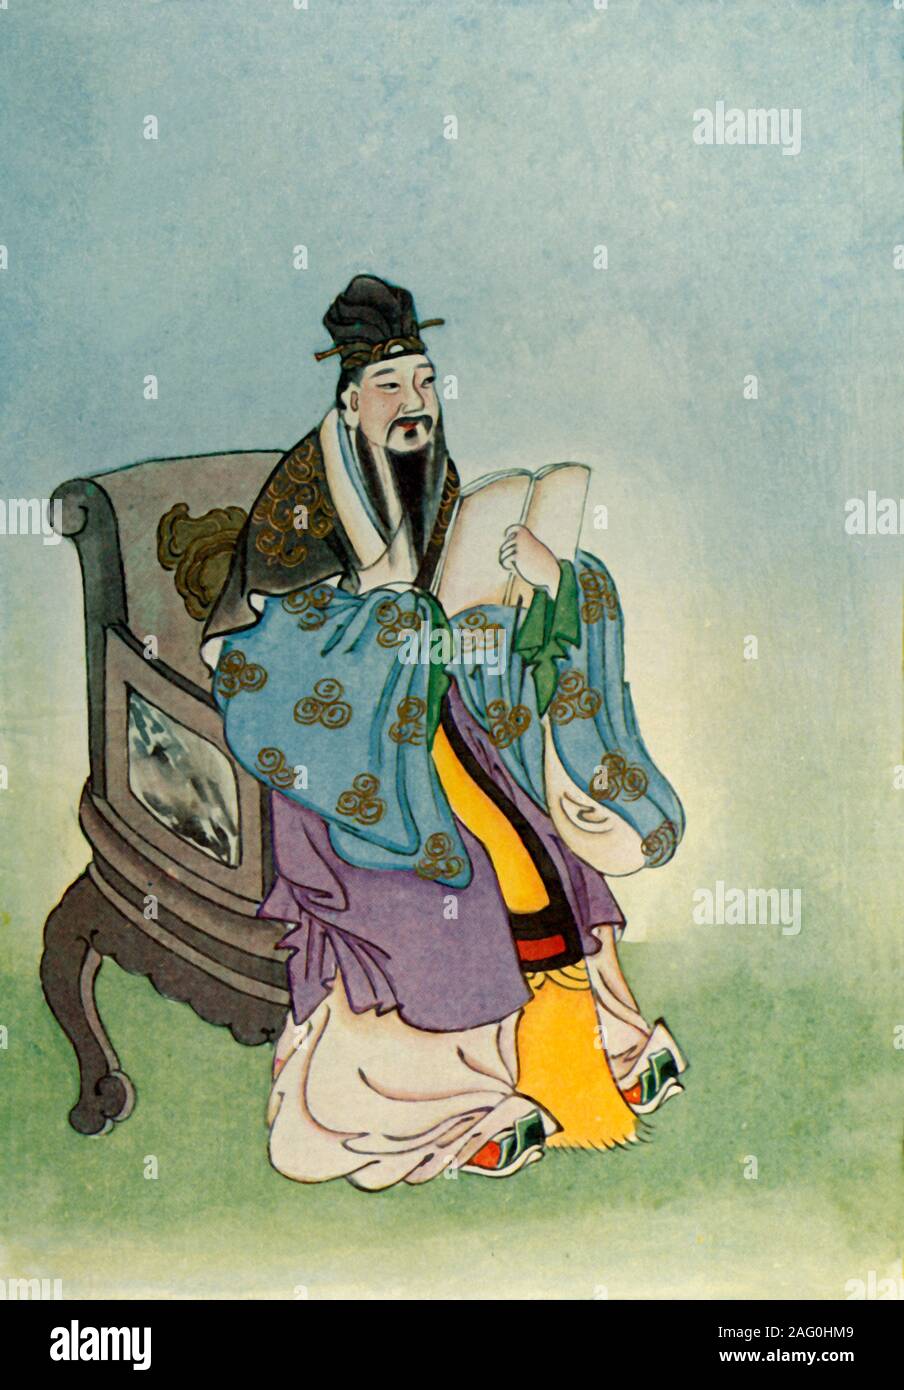 'Mencius', 1922. Mencius (4th century BC) Chinese Confucian philosopher who lived during the Warring States period and travelled, teaching the belief that humans are innately good, a quality requiring cultivation and the right environment to flourish. From &quot;Myths and Legends of China&quot;, by E. T. C. Werner. [George G. Harrap &amp; Co. Ltd., London, Calcutta, Sydney, 1922] Stock Photo